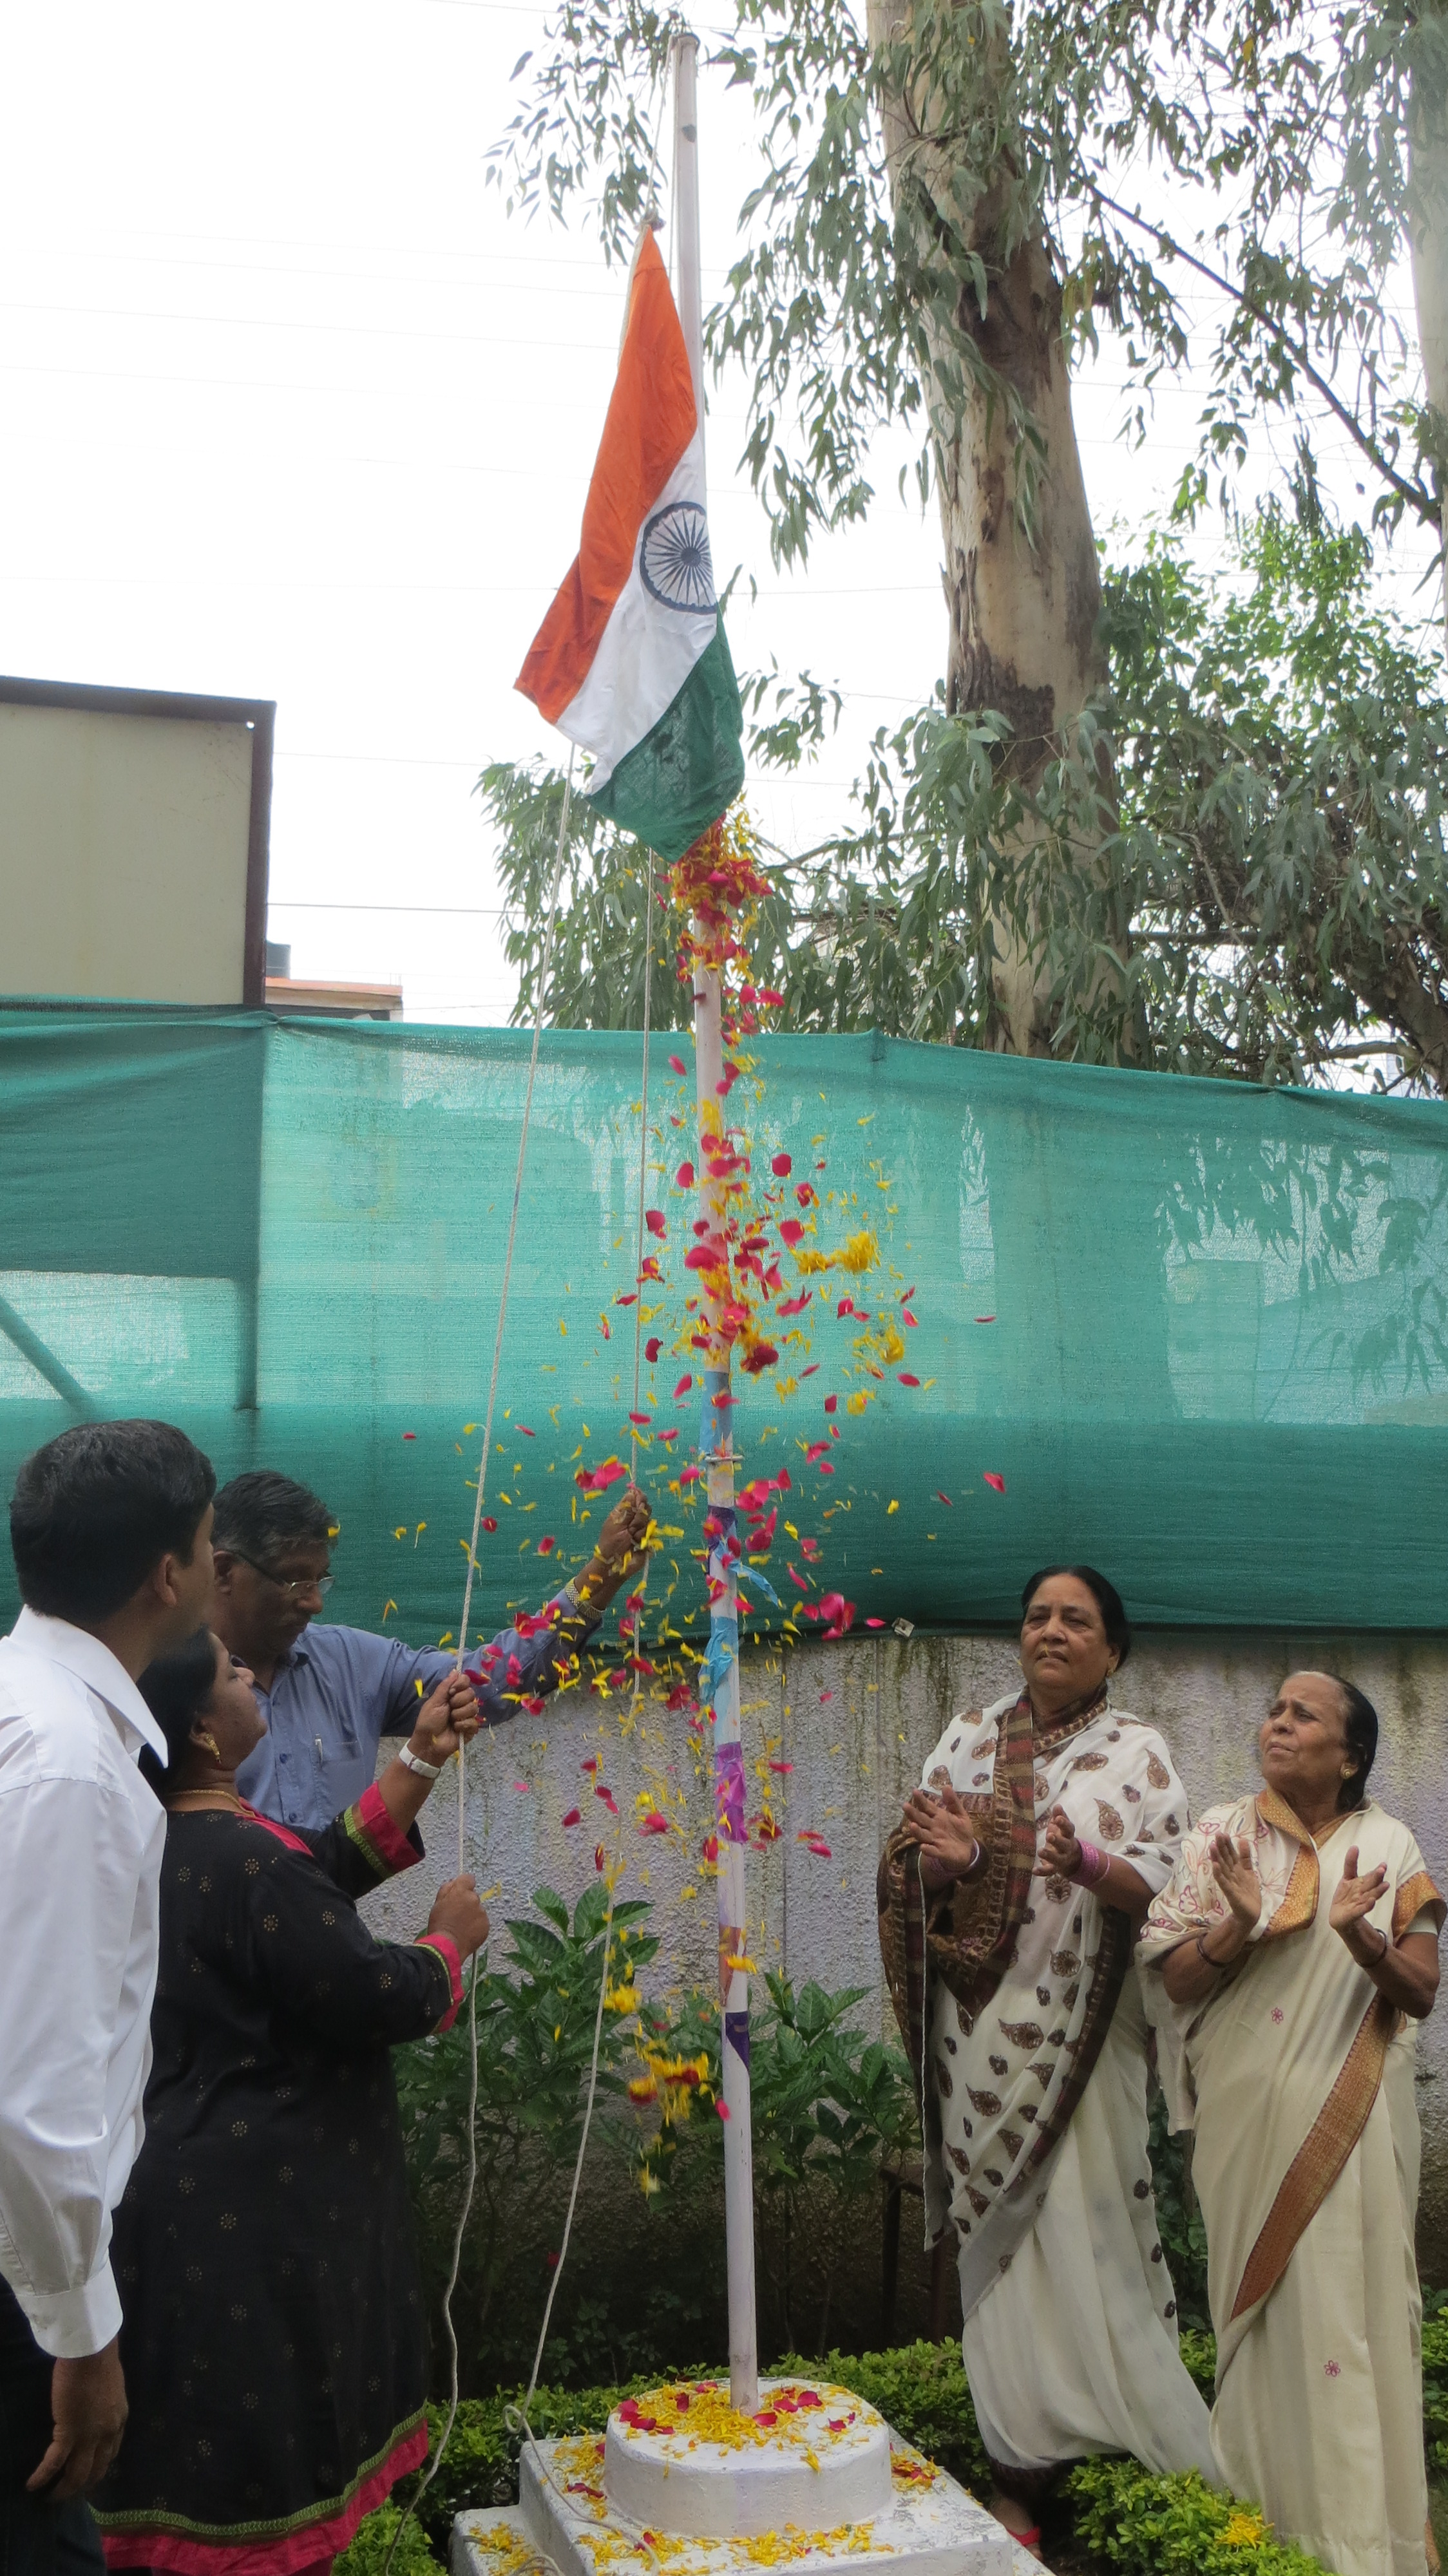 Children at the Chingari Trust in Bhopal celebrate Indian independence day. Independence day celebrations in August 2013 at the Chingari Trust Rehabilitation Centre.